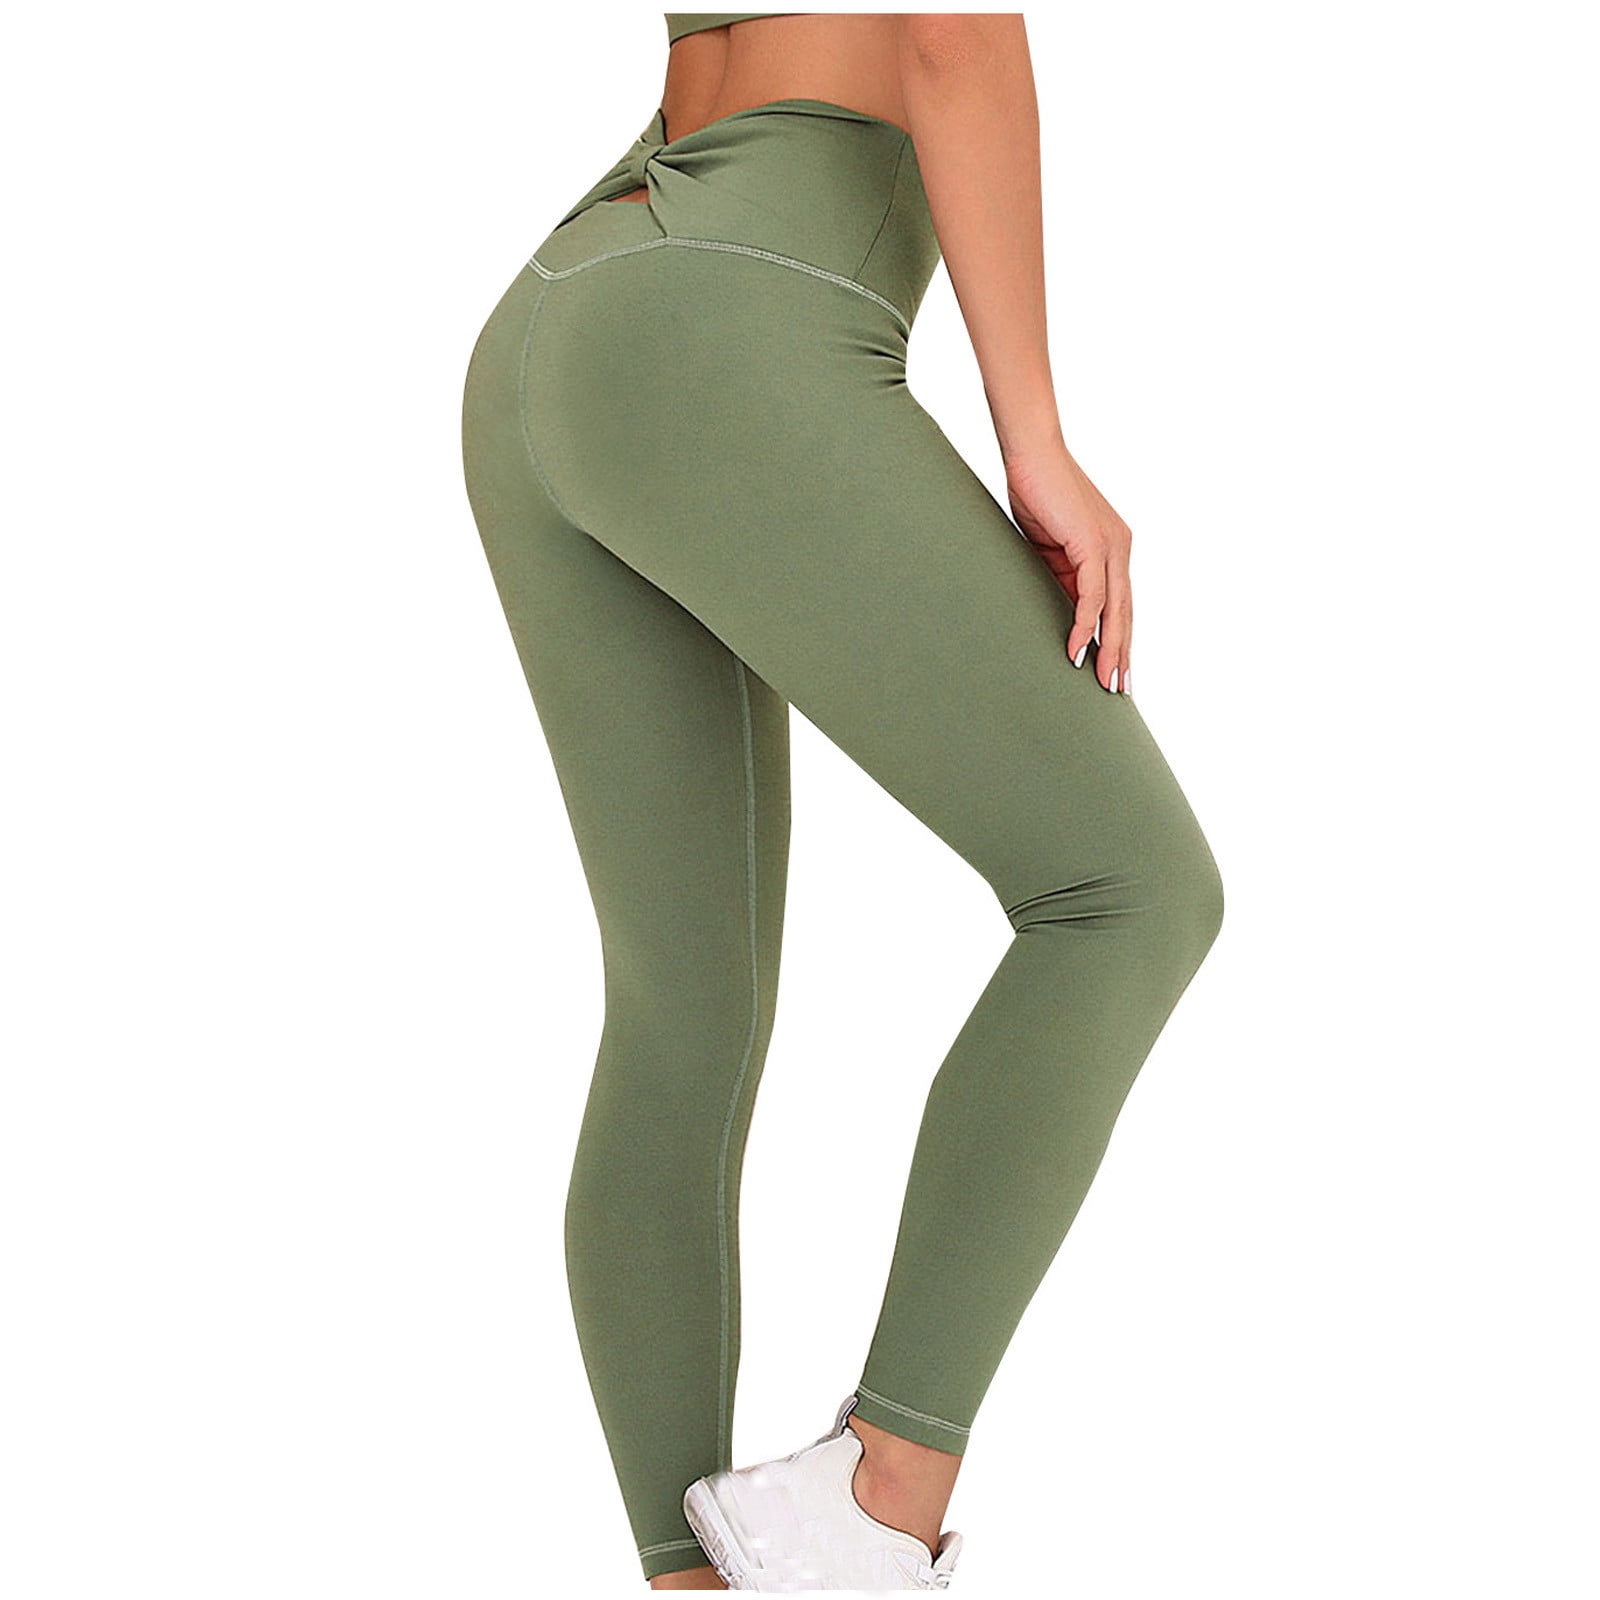 Details about   Women Fashionable Pocket Yoga Pants High Elastic Hip Lifting Slim And Sweat Pant 